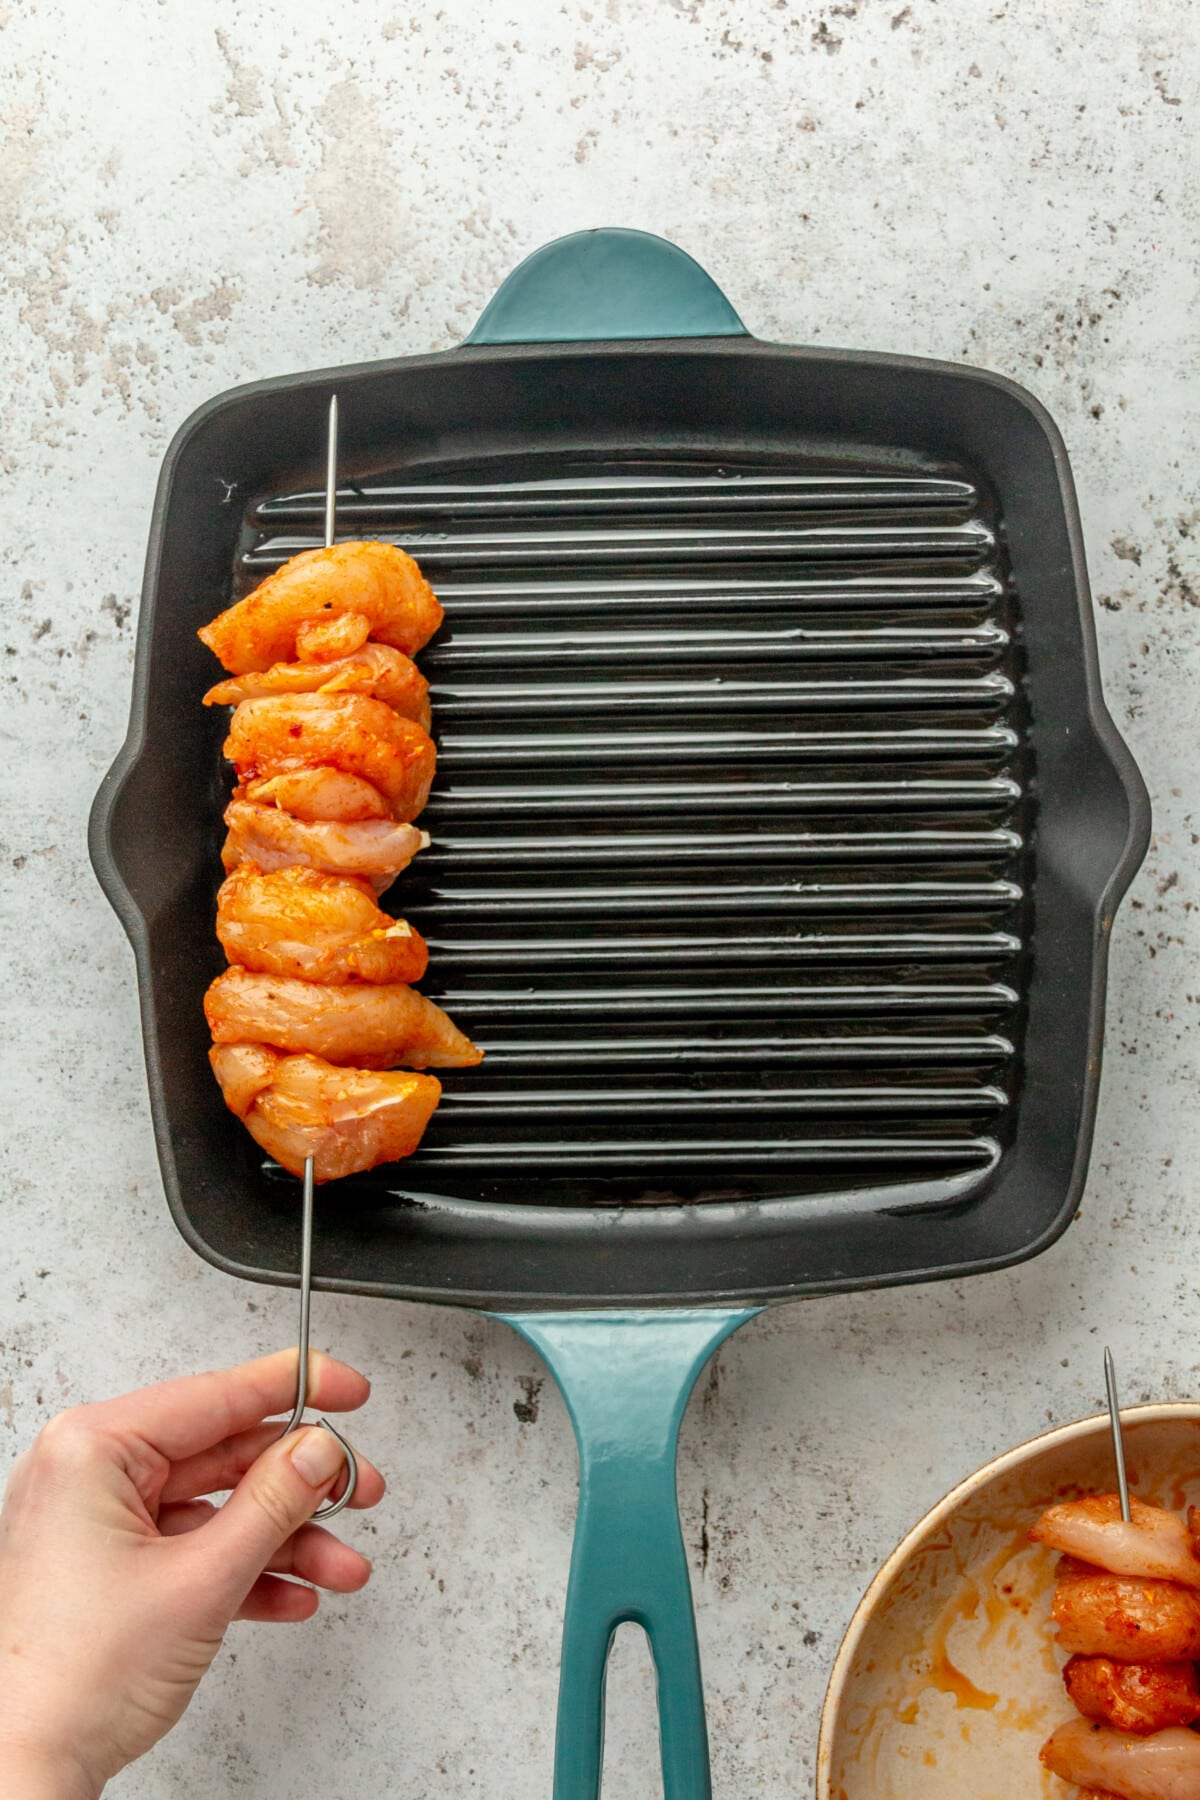 A skewer of spiced chicken tenders is placed into a grill cast iron skillet on a light grey surface.